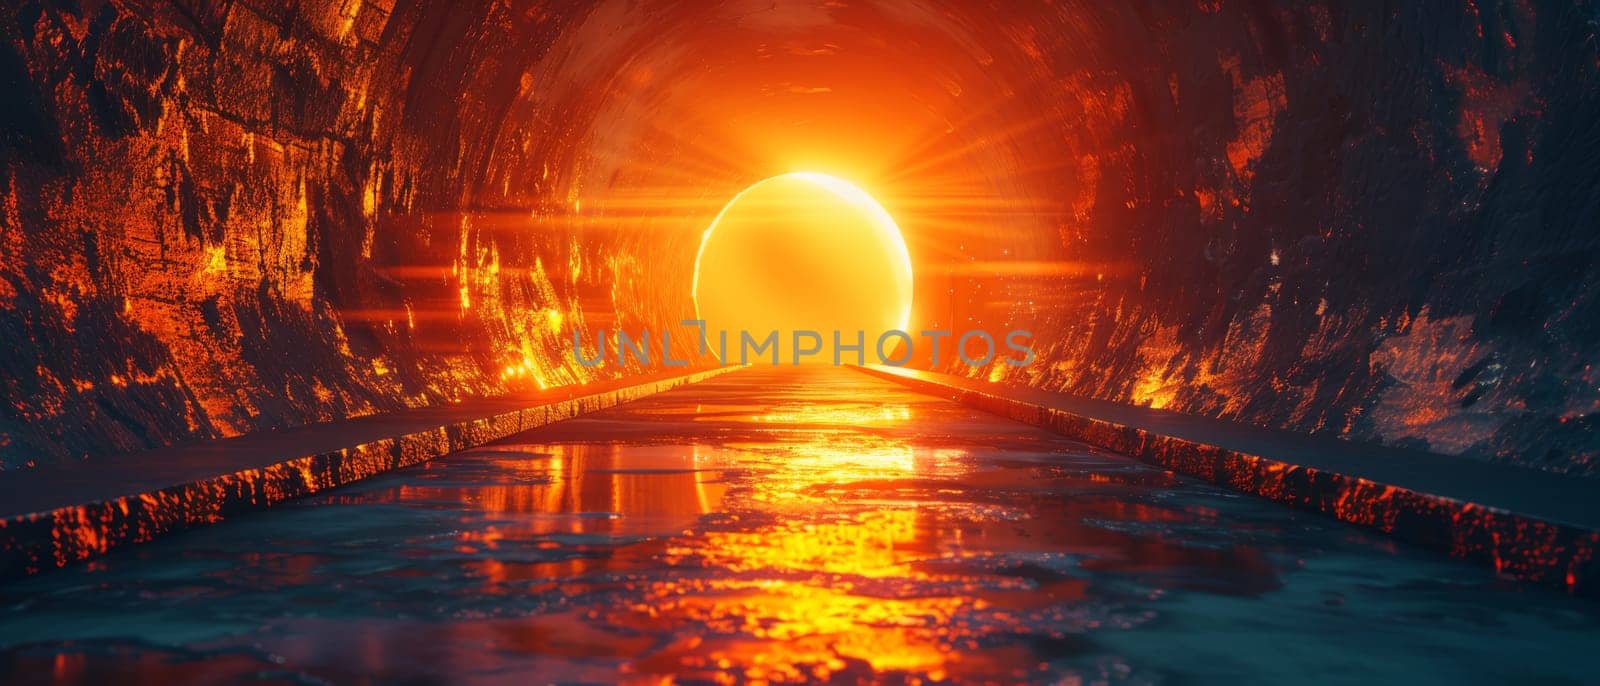 A tunnel with a bright orange light shining through it by AI generated image.